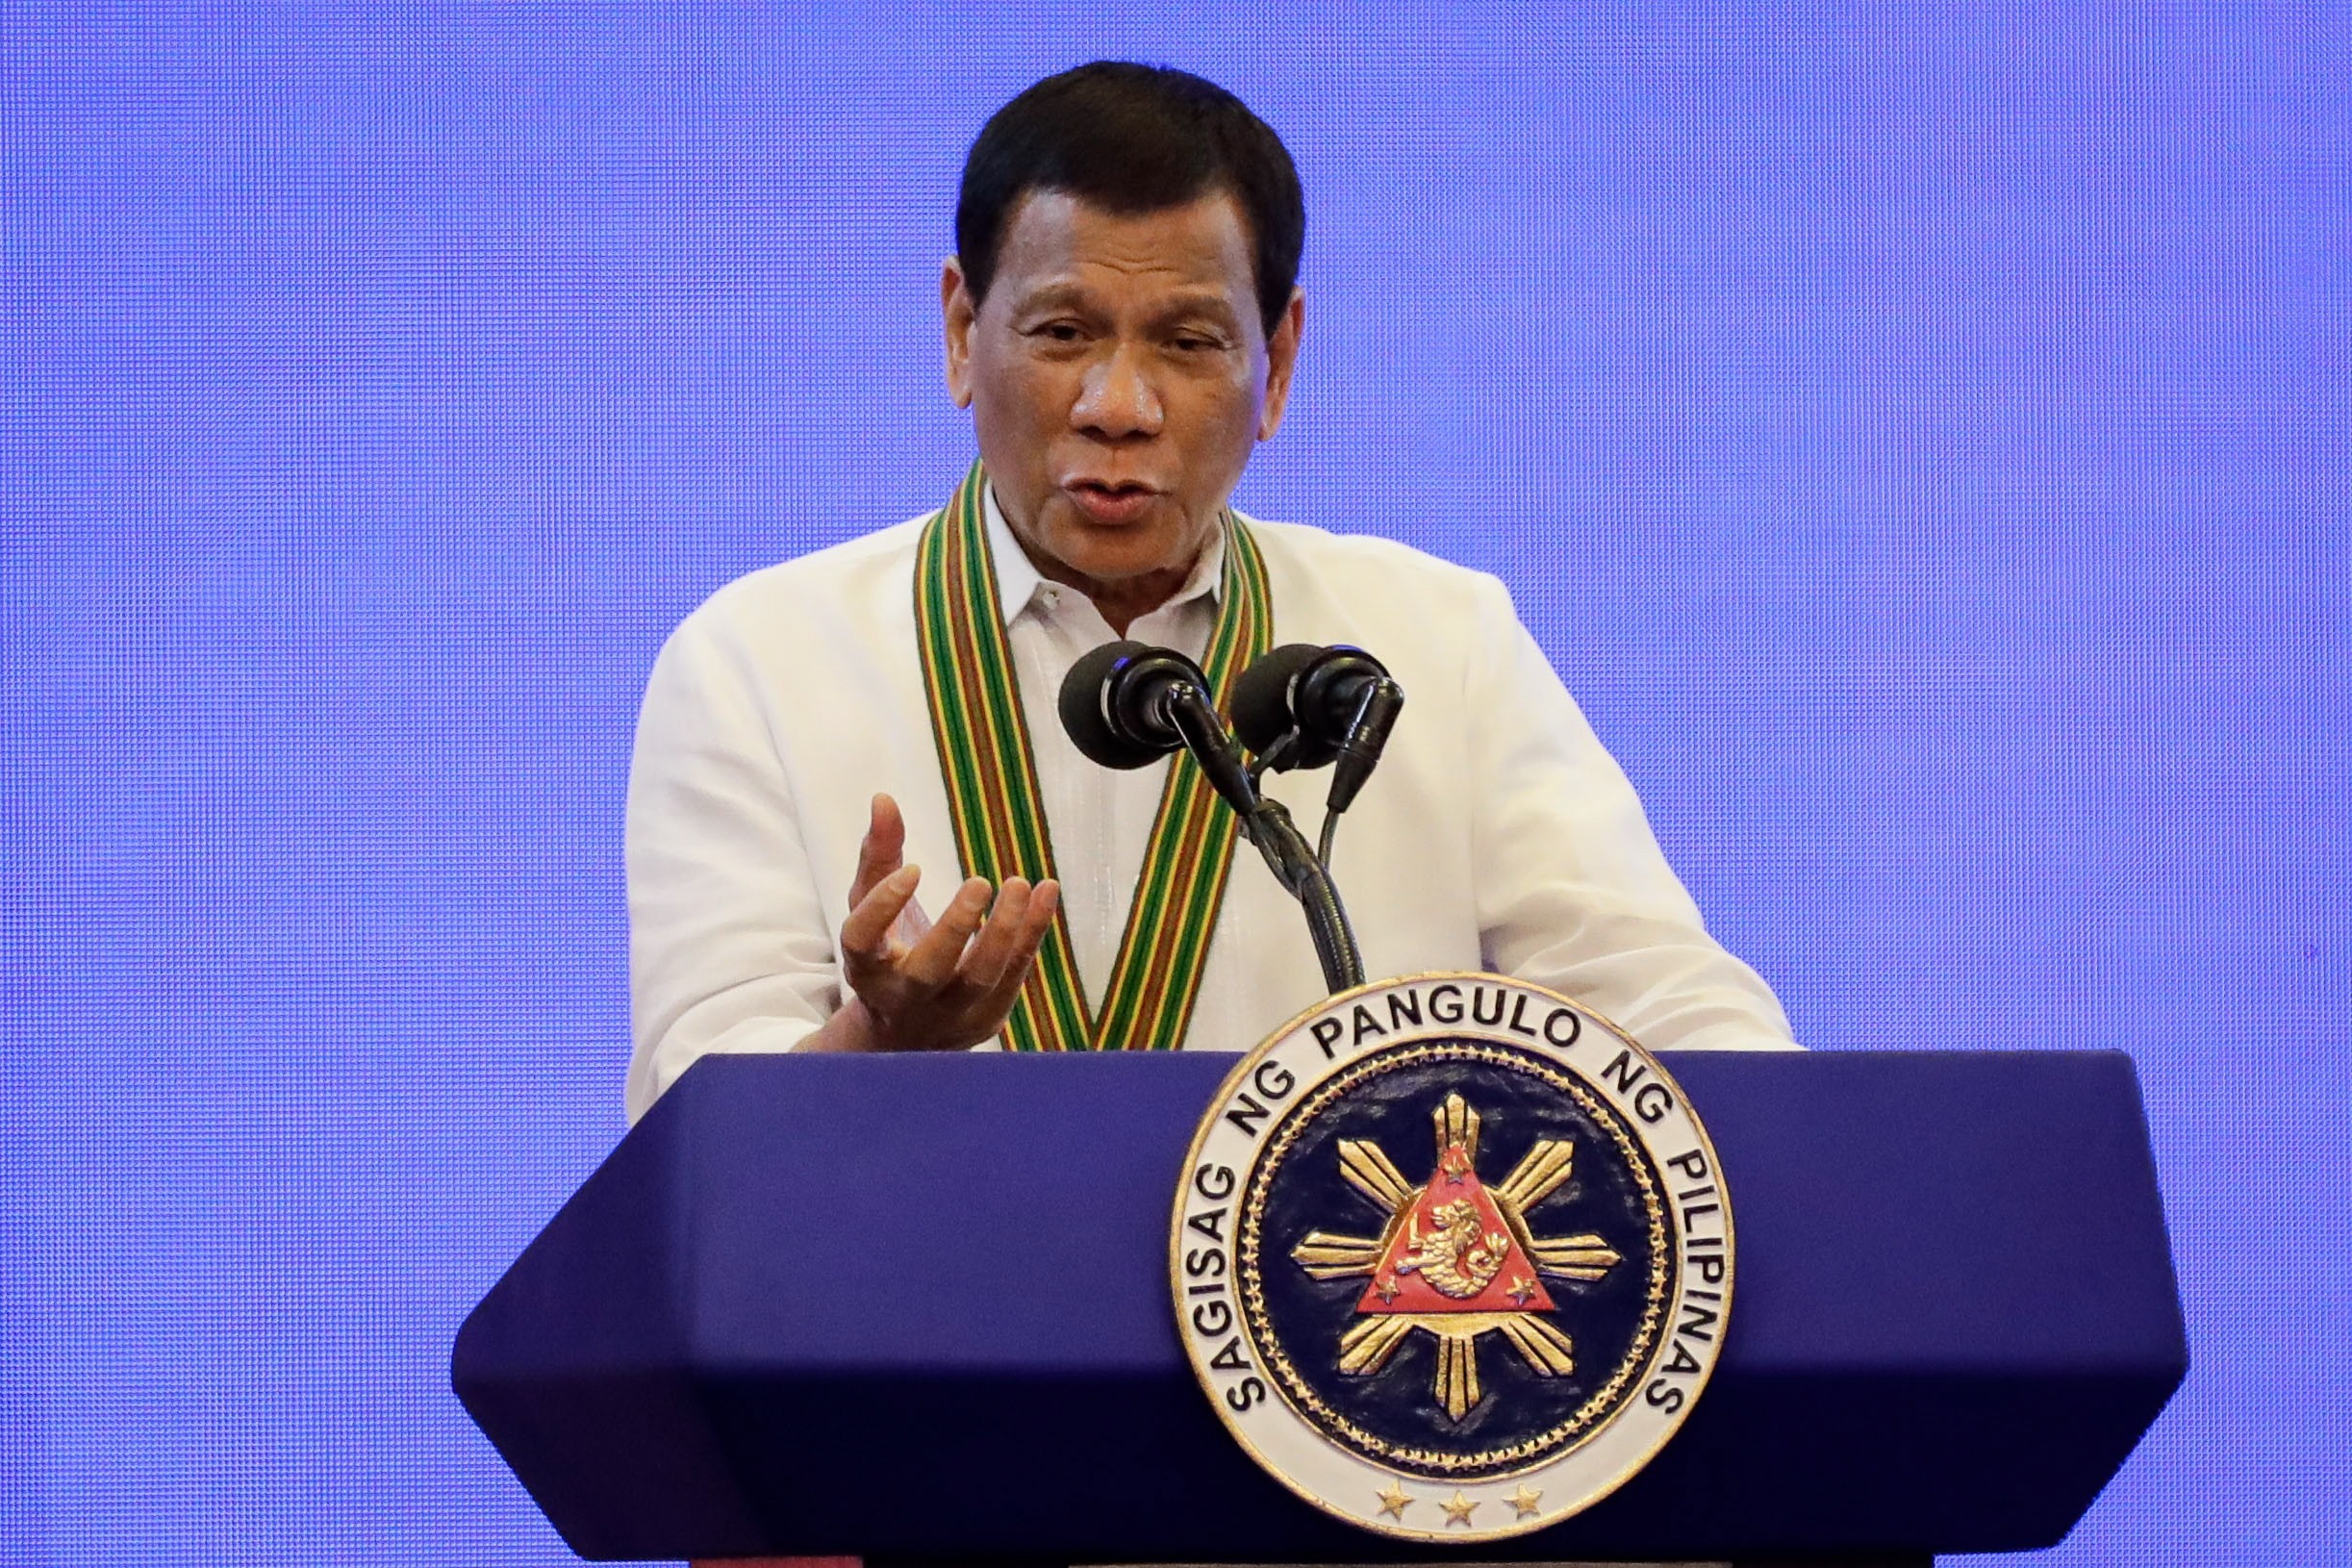 Duterte S Proposal To Change The Philippines Name Highlights The